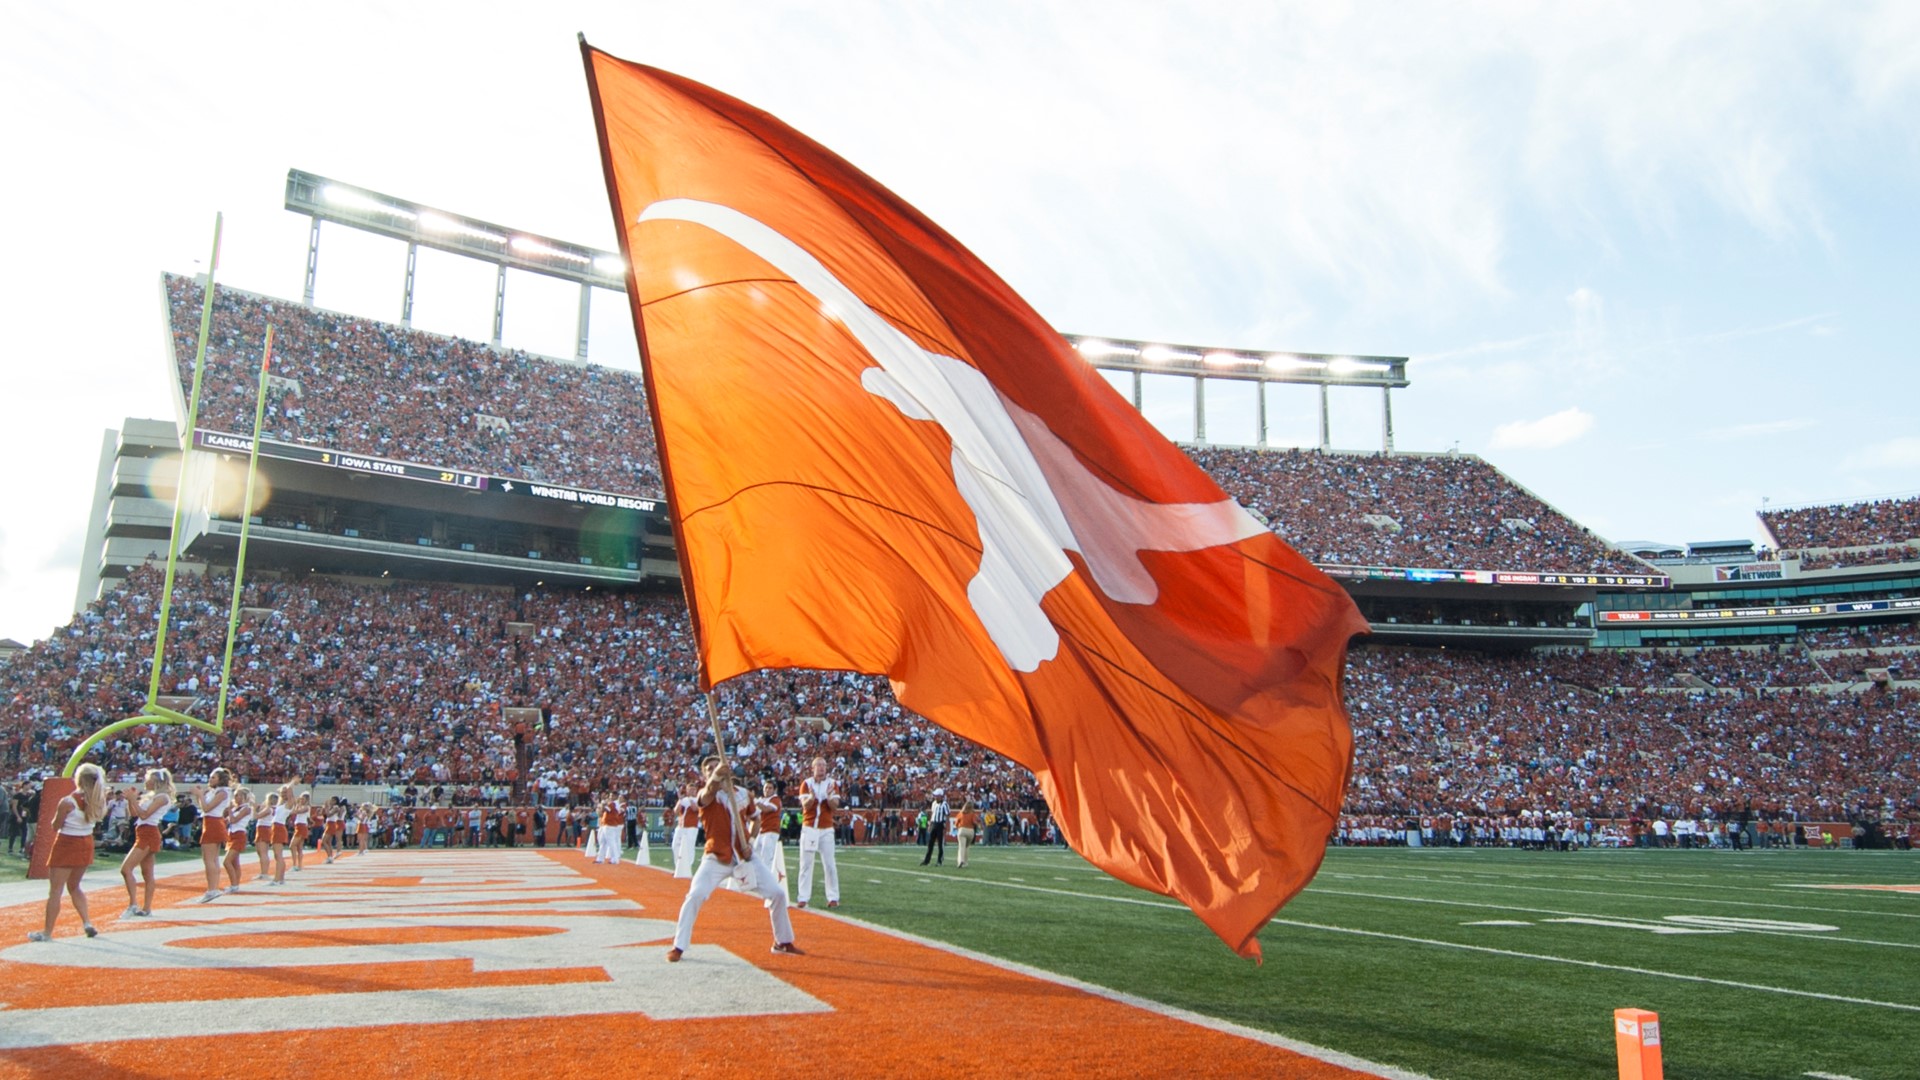 You can expect to see a lot of UT fans wearing burnt orange around town on Saturday as the Longhorns take on LSU. But how did UT come up with that color?